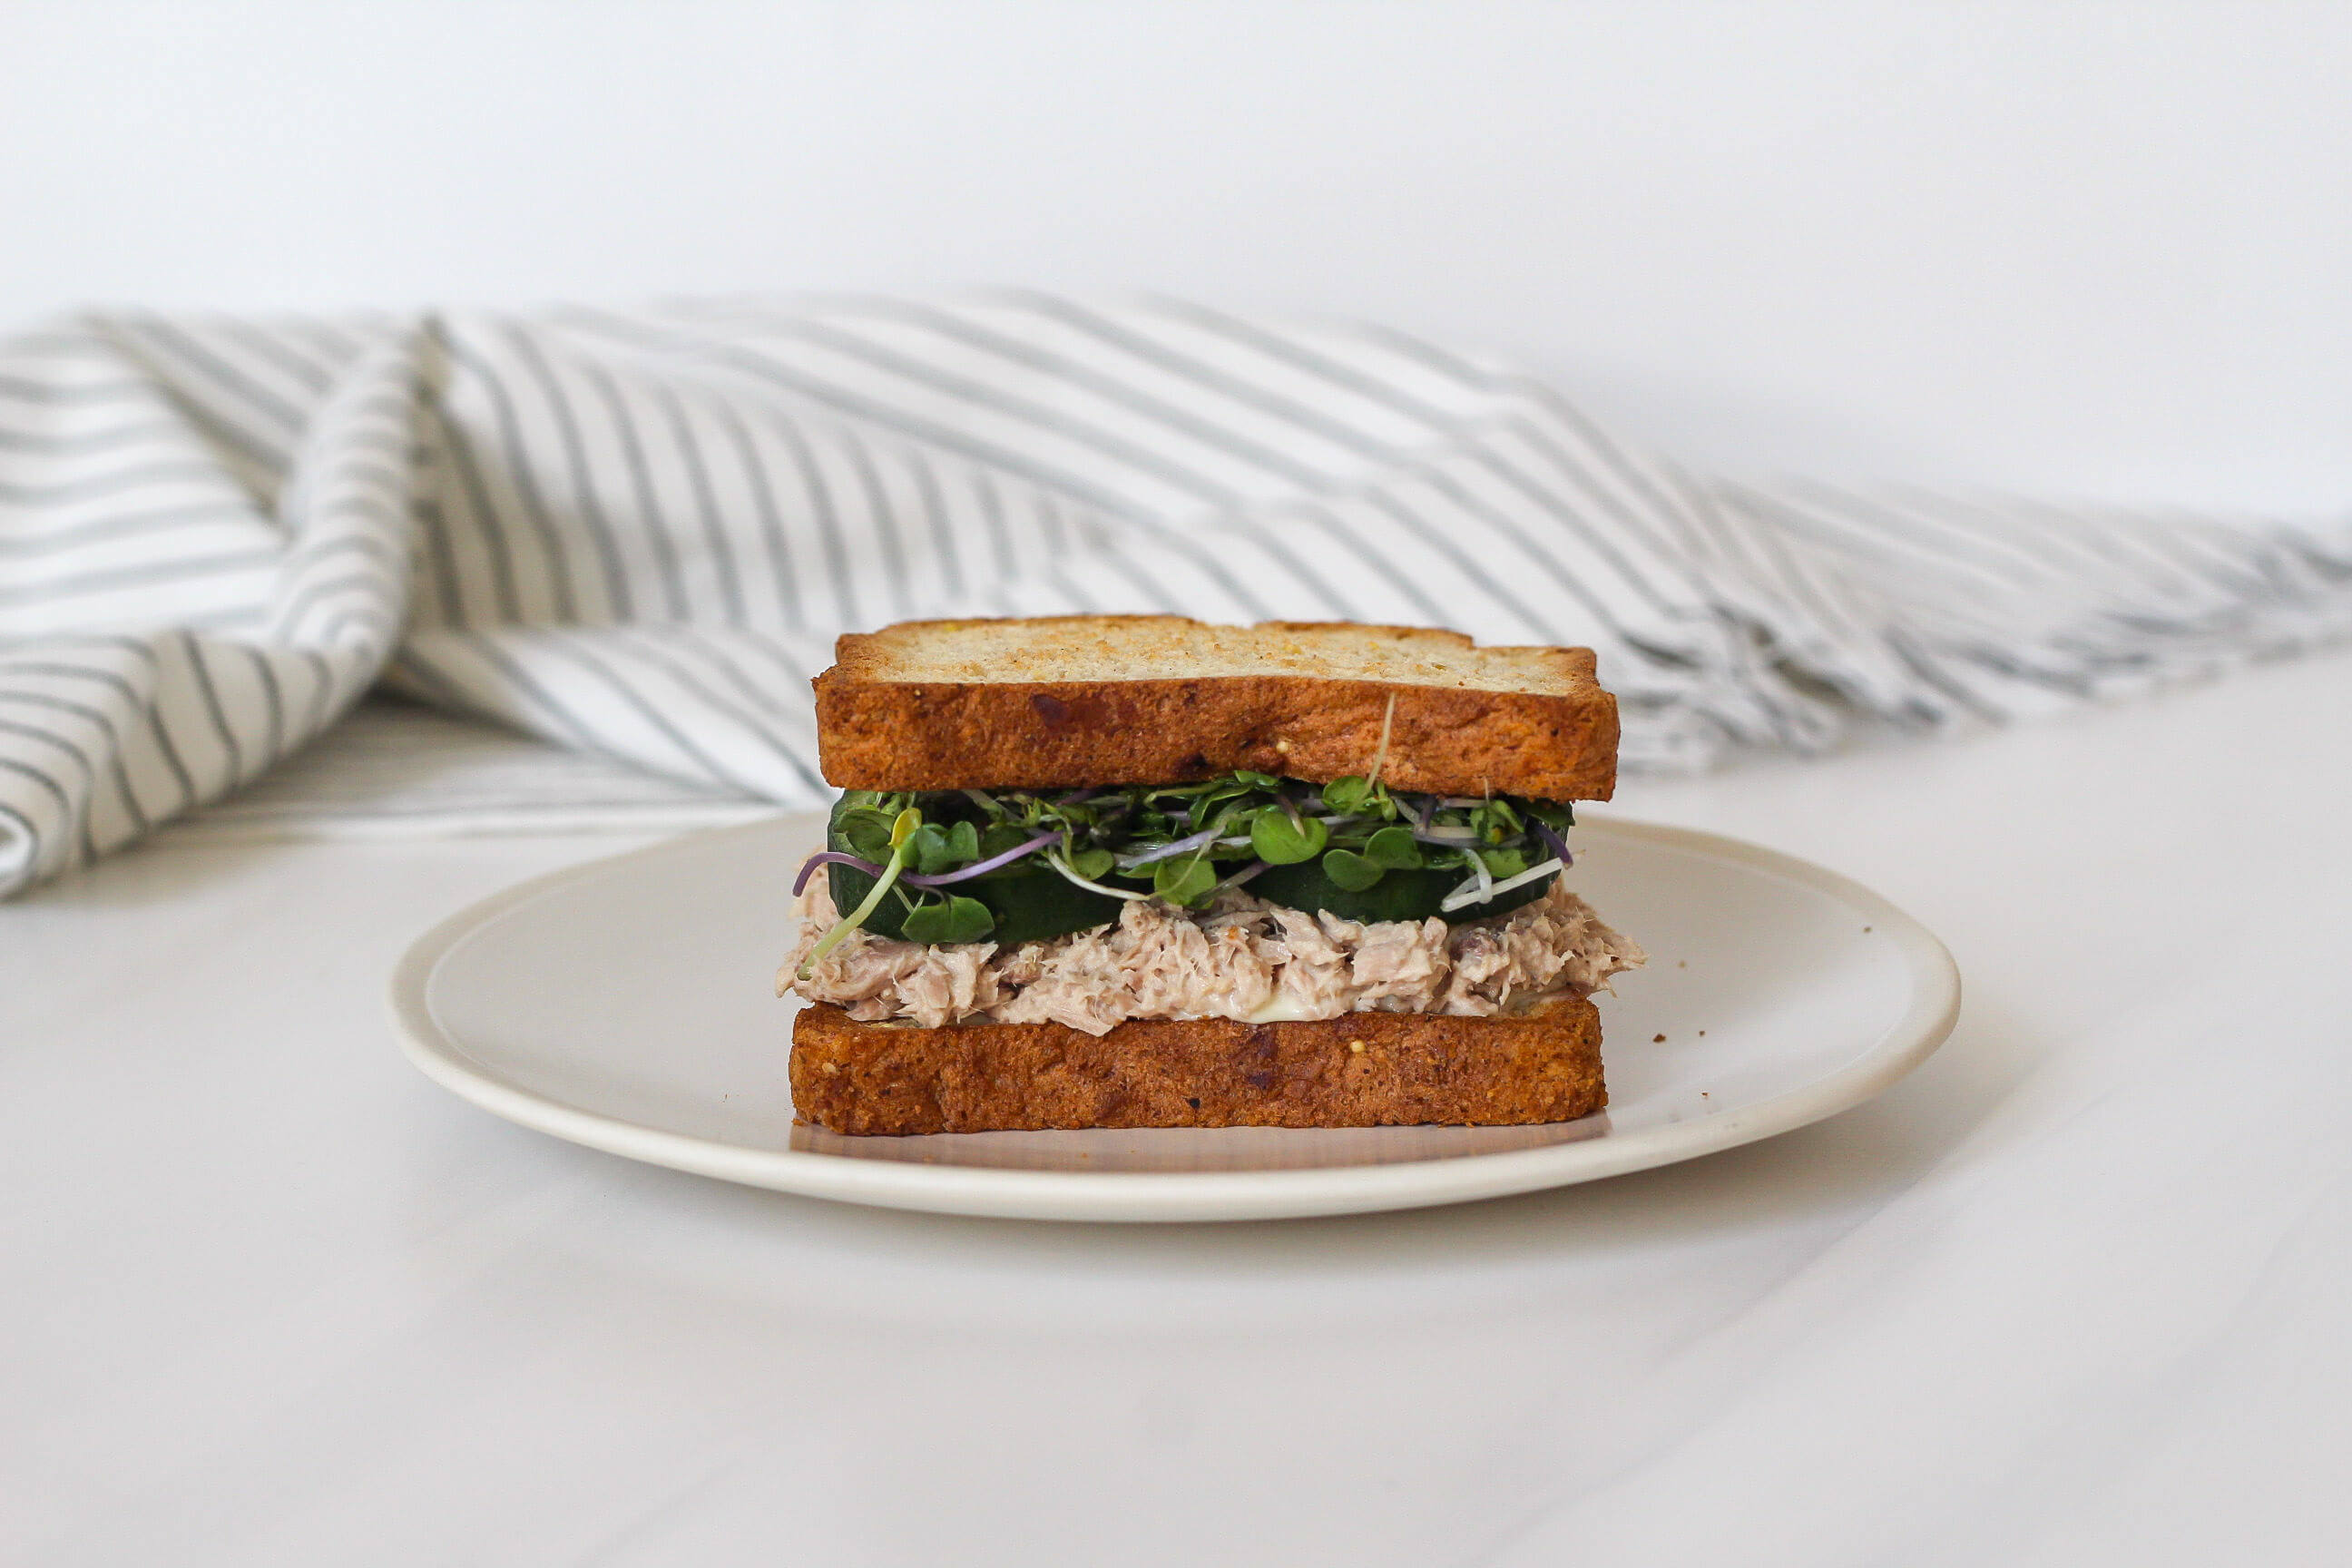 20 Meal Ideas to Support Student-Athletes: Tuna & Cucumber Sandwich